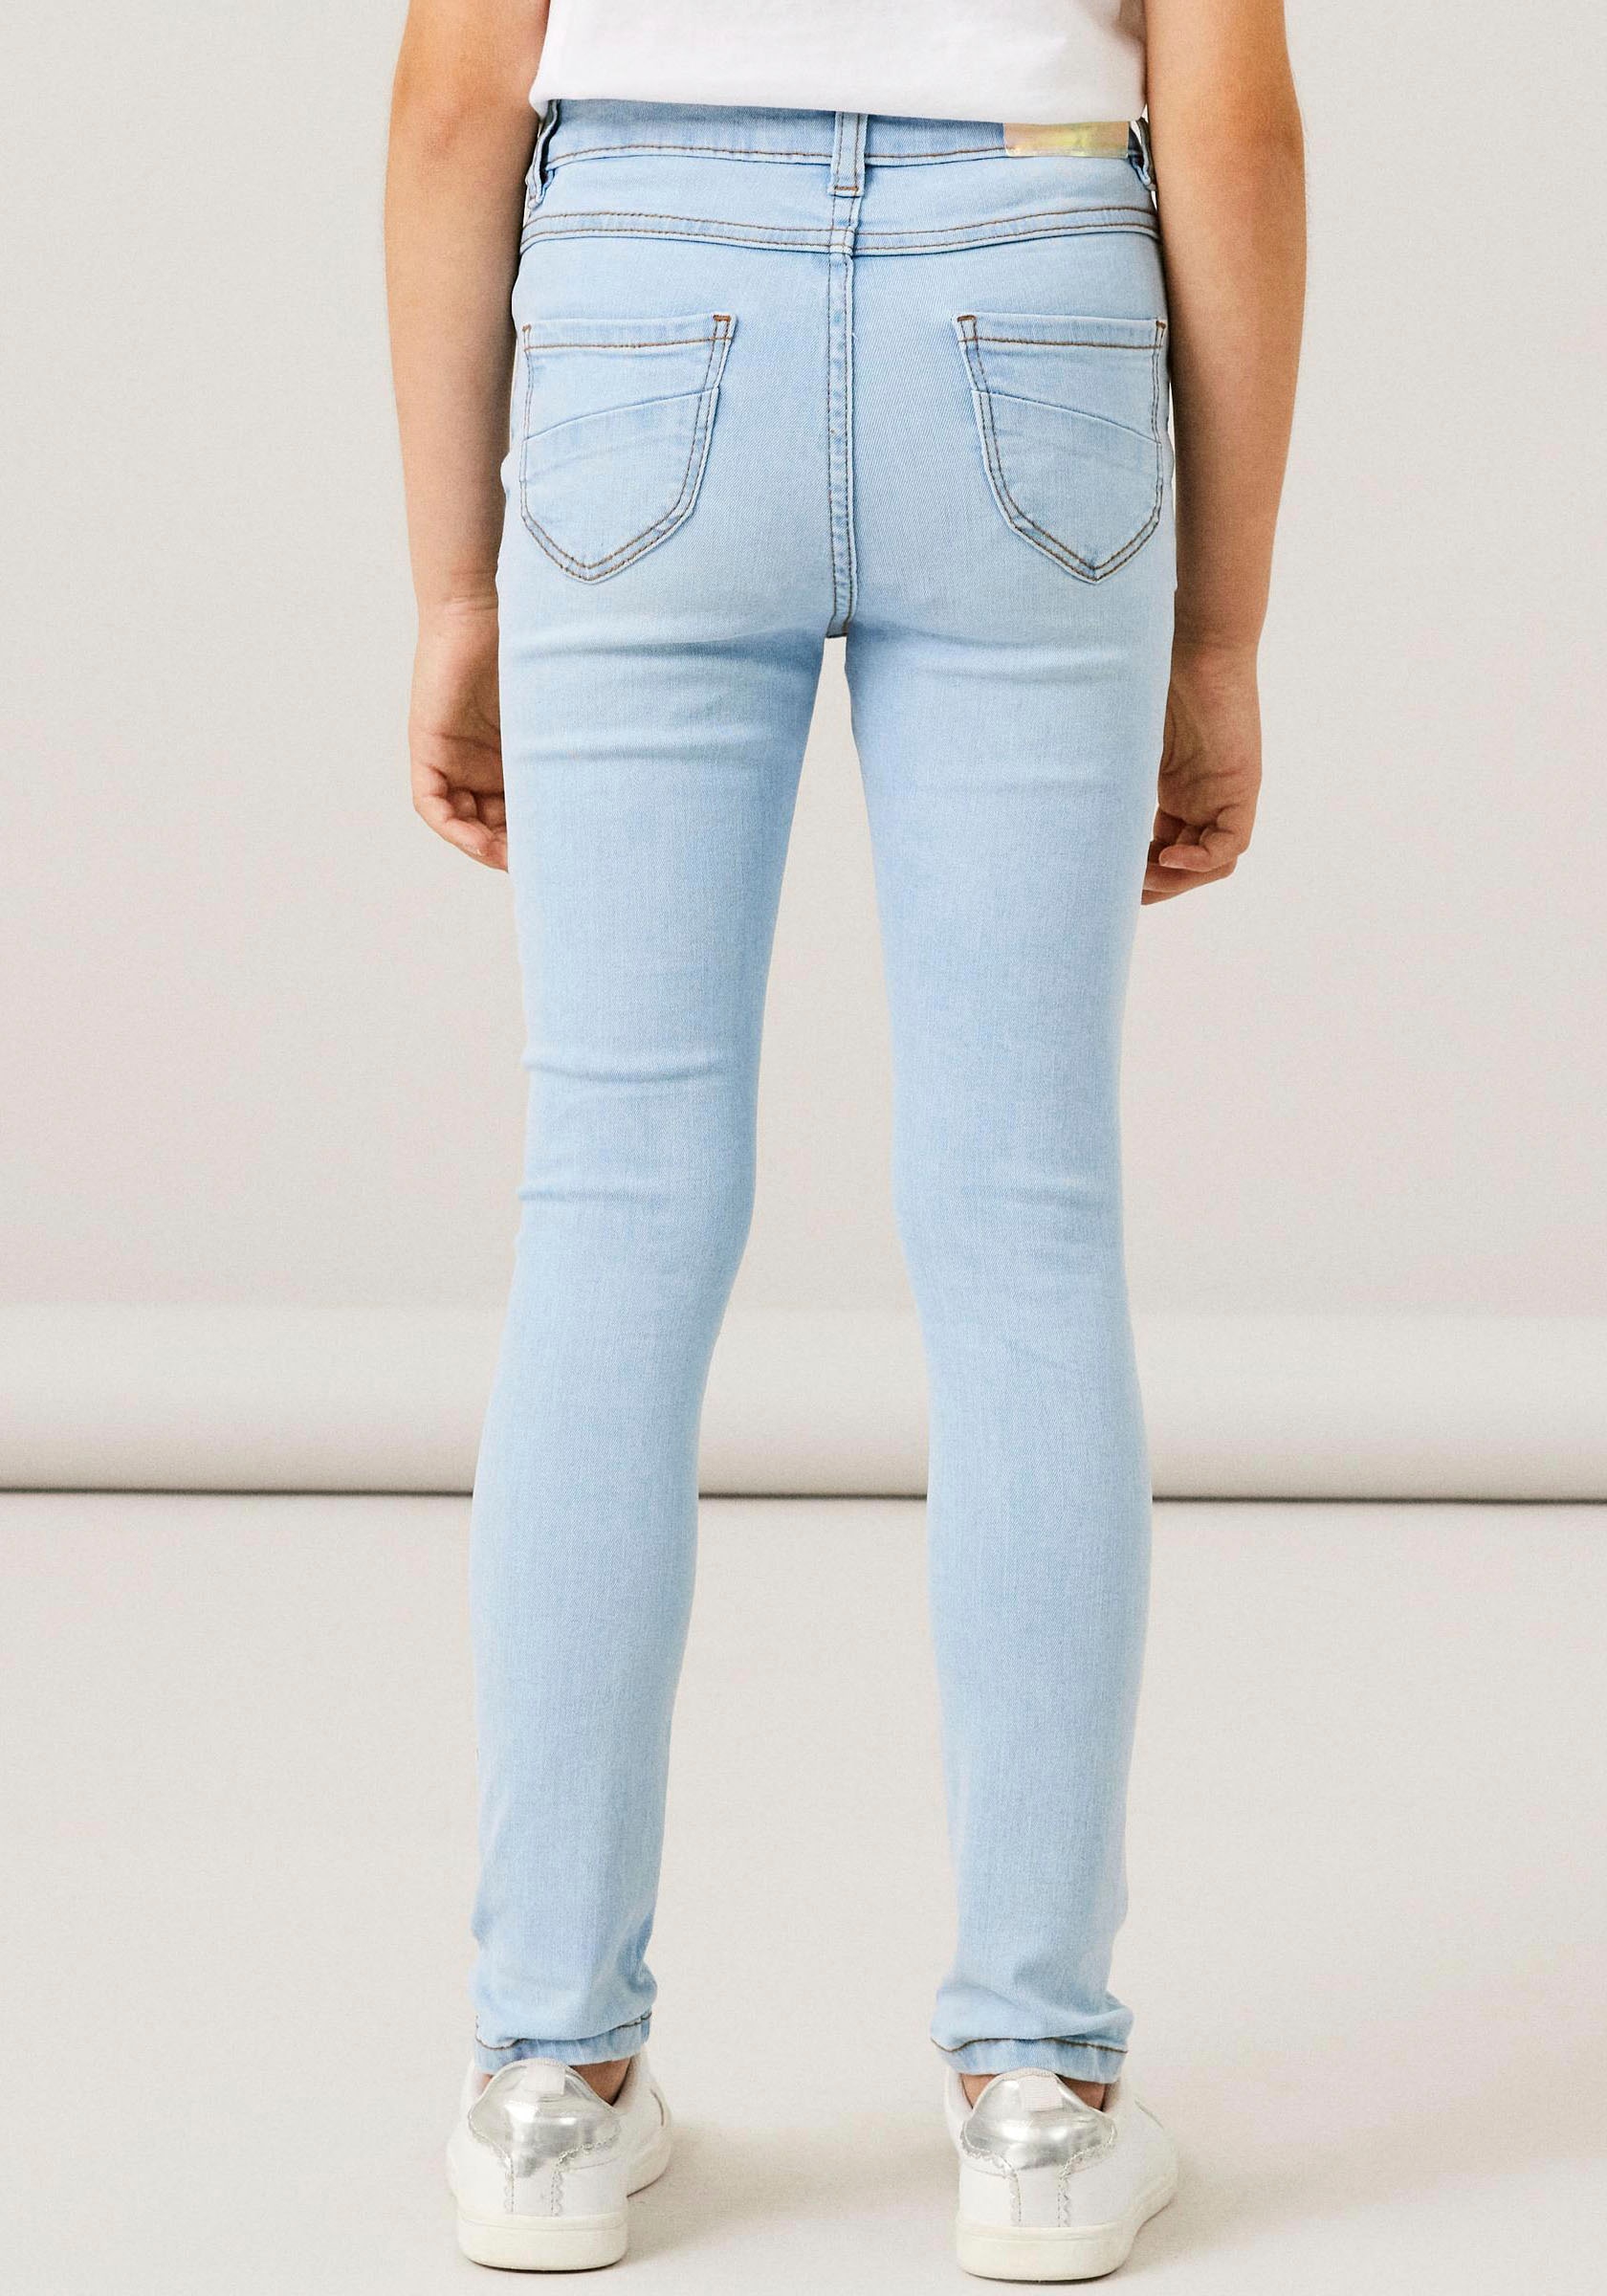 JEANS online NOOS«, »NKFPOLLY Skinny-fit-Jeans Name Stretch SKINNY kaufen 1180-ST It mit HW